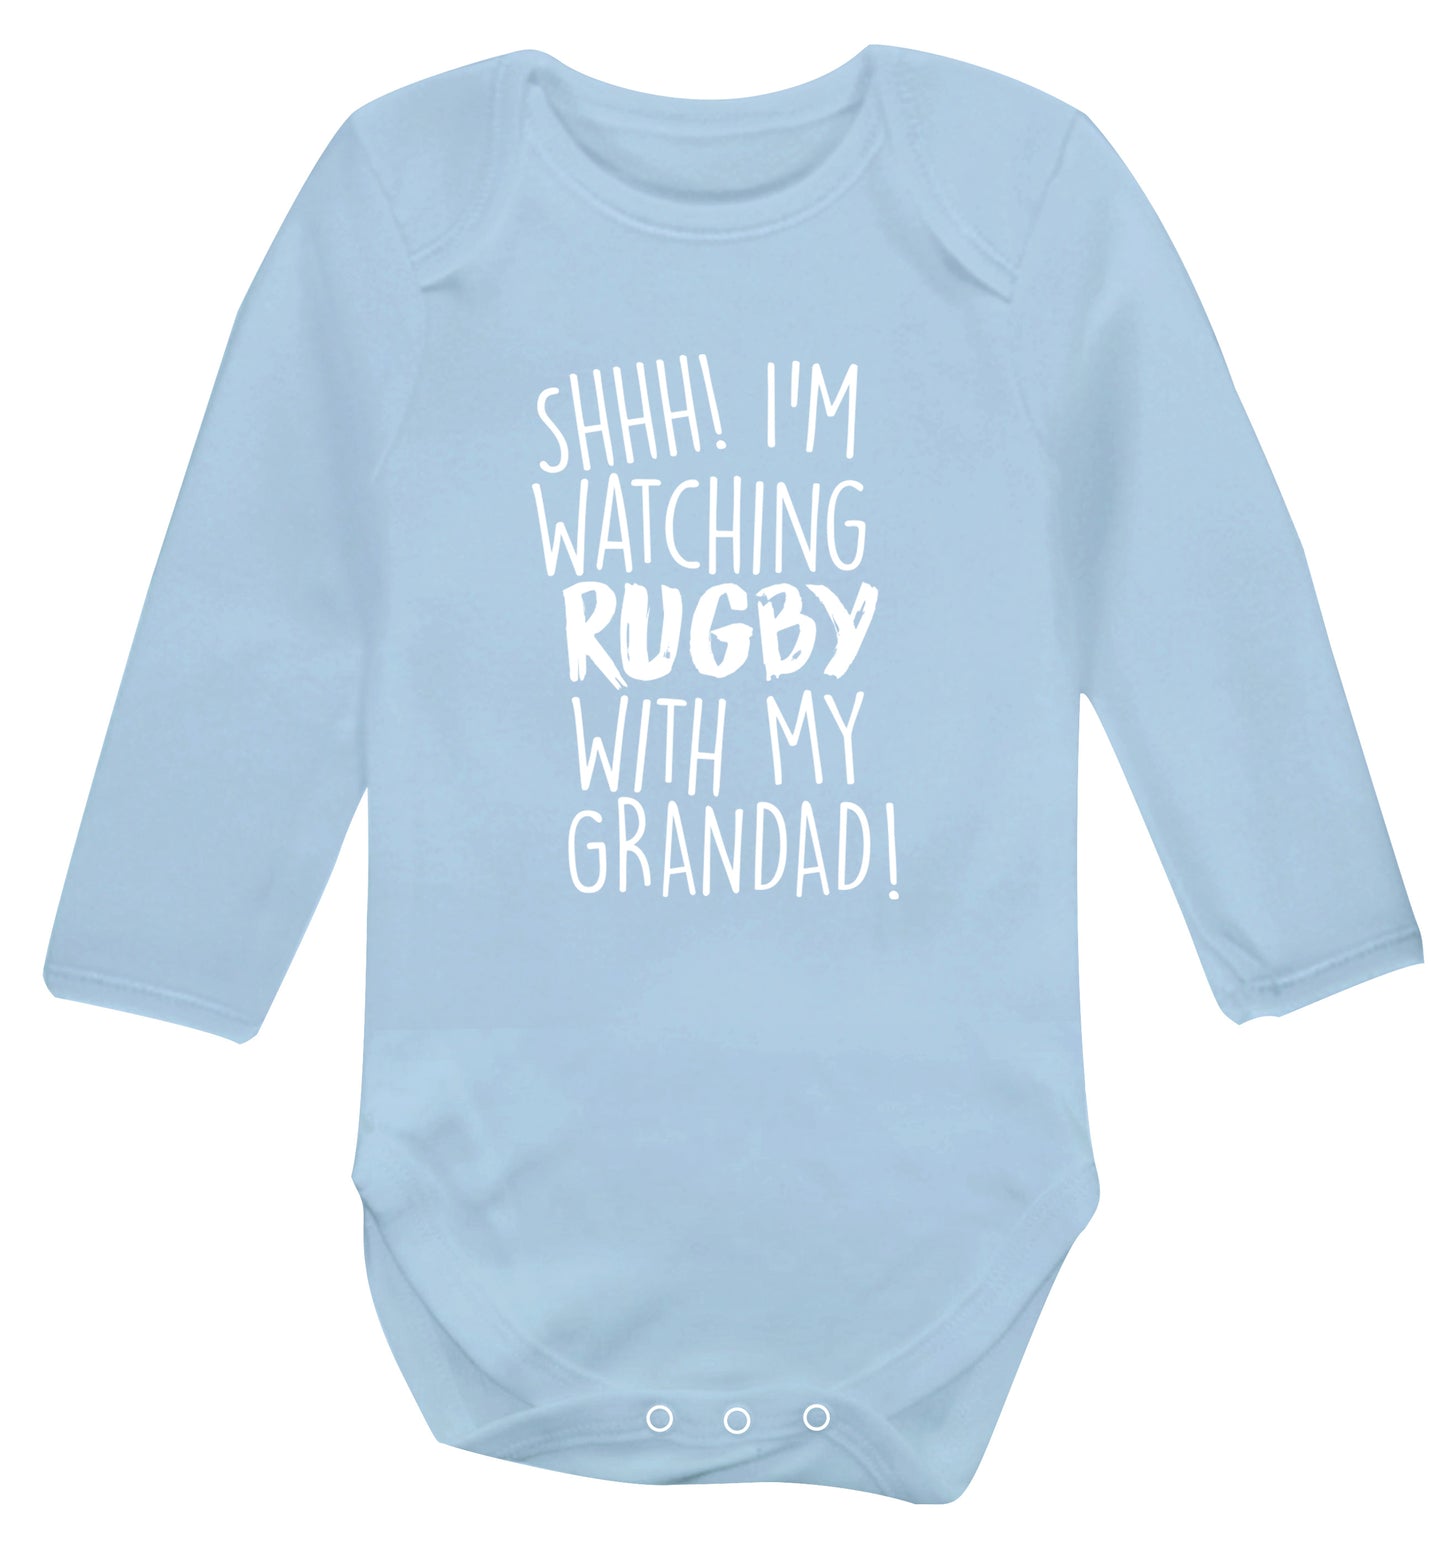 Shh I'm watching rugby with my grandad Baby Vest long sleeved pale blue 6-12 months